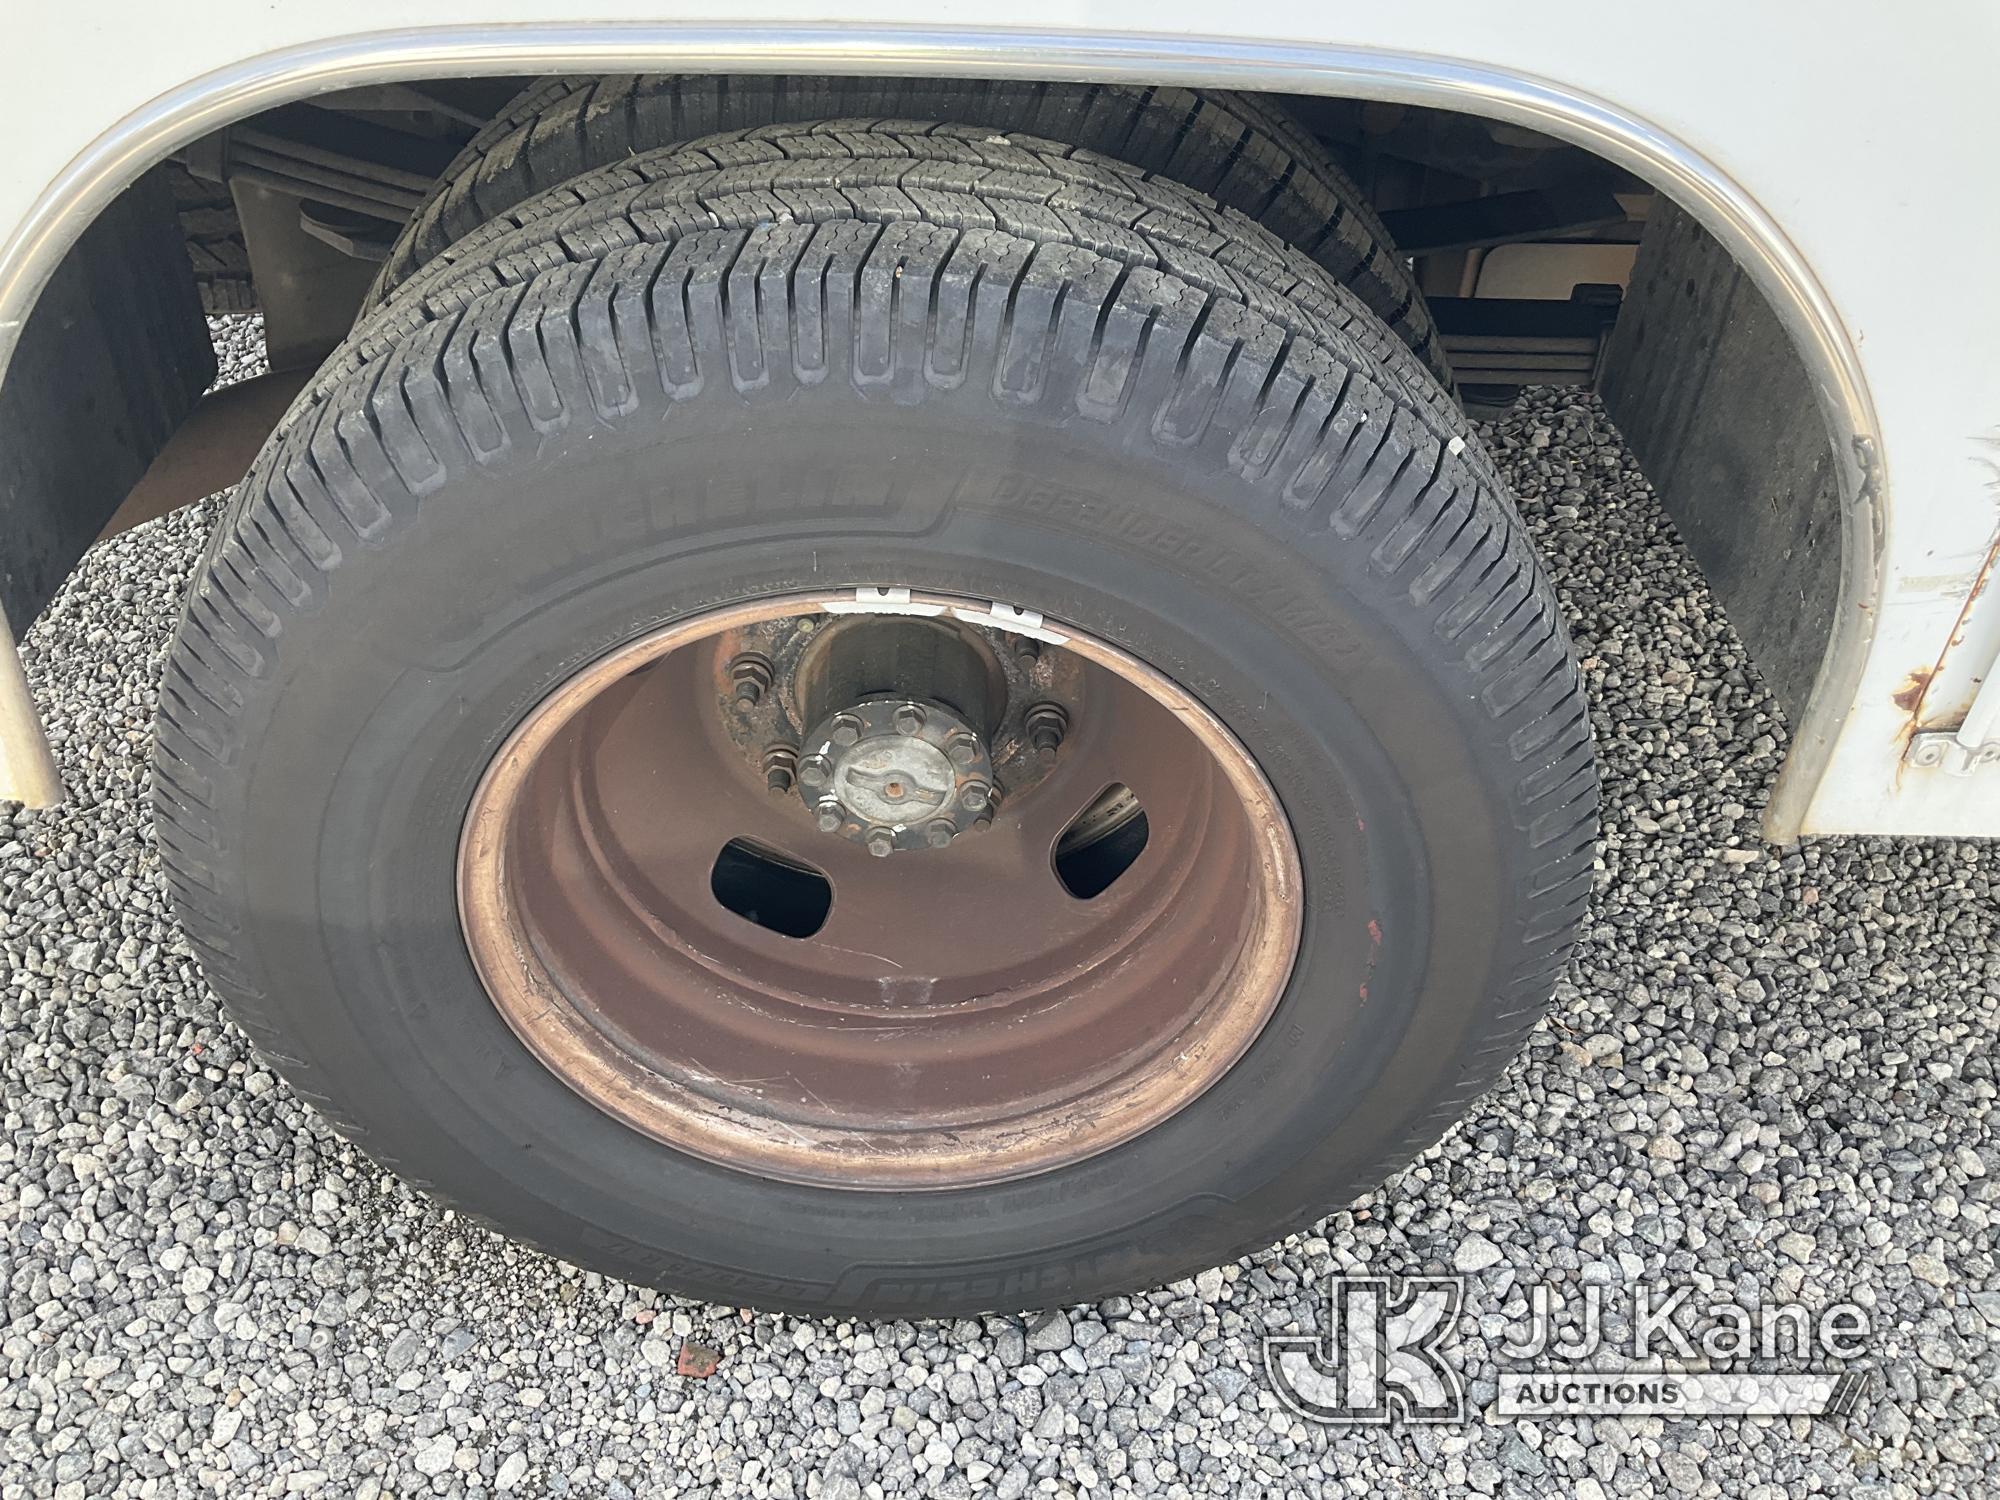 (Jurupa Valley, CA) 2010 Ford F-350 SD Dual Wheel Service Truck Runs & Moves, Engine Ticking, Passed